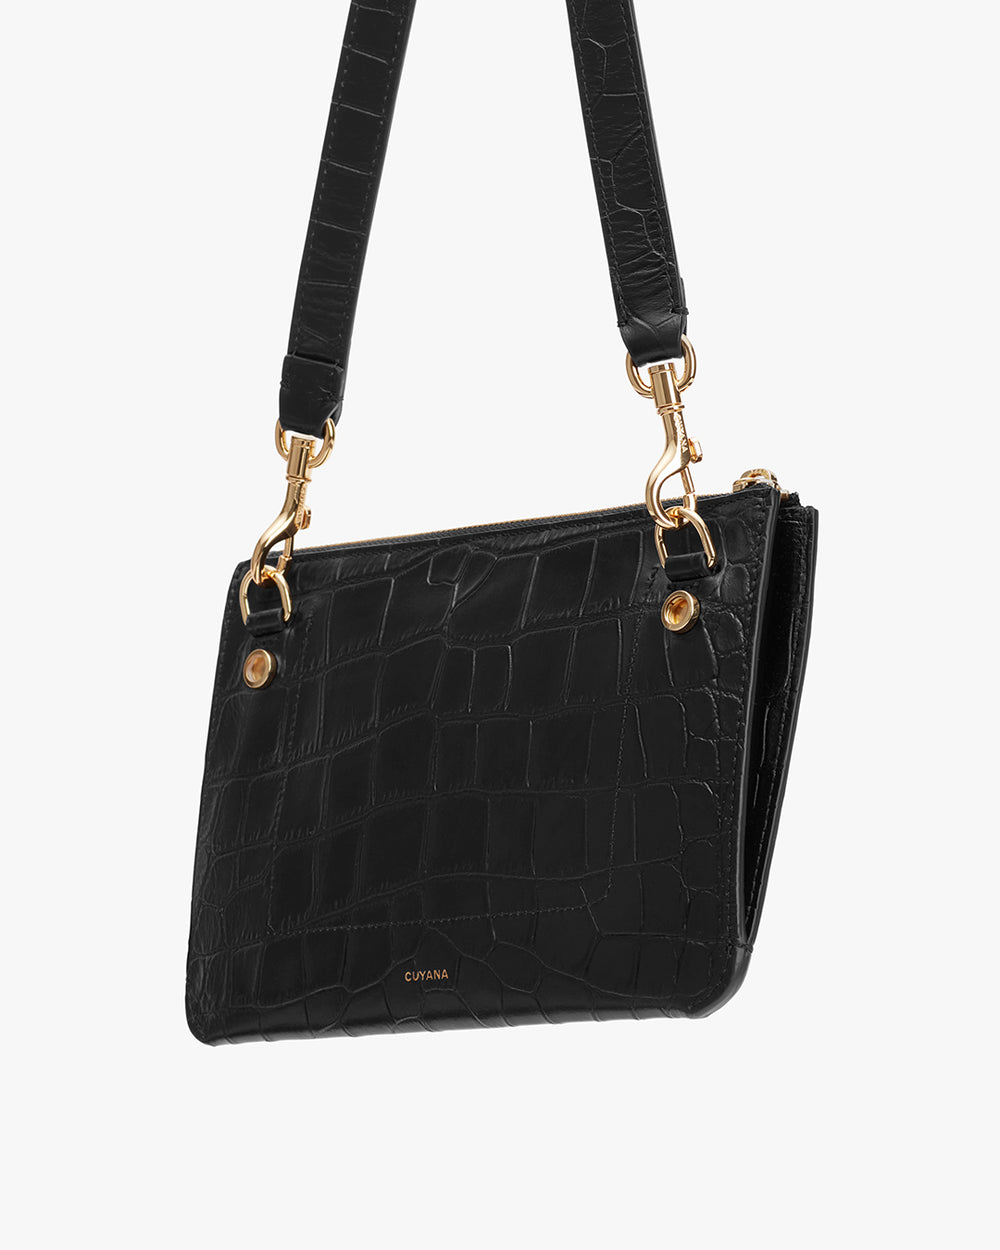 Shoulder bag with croc-embossed leather and gold-tone hardware.